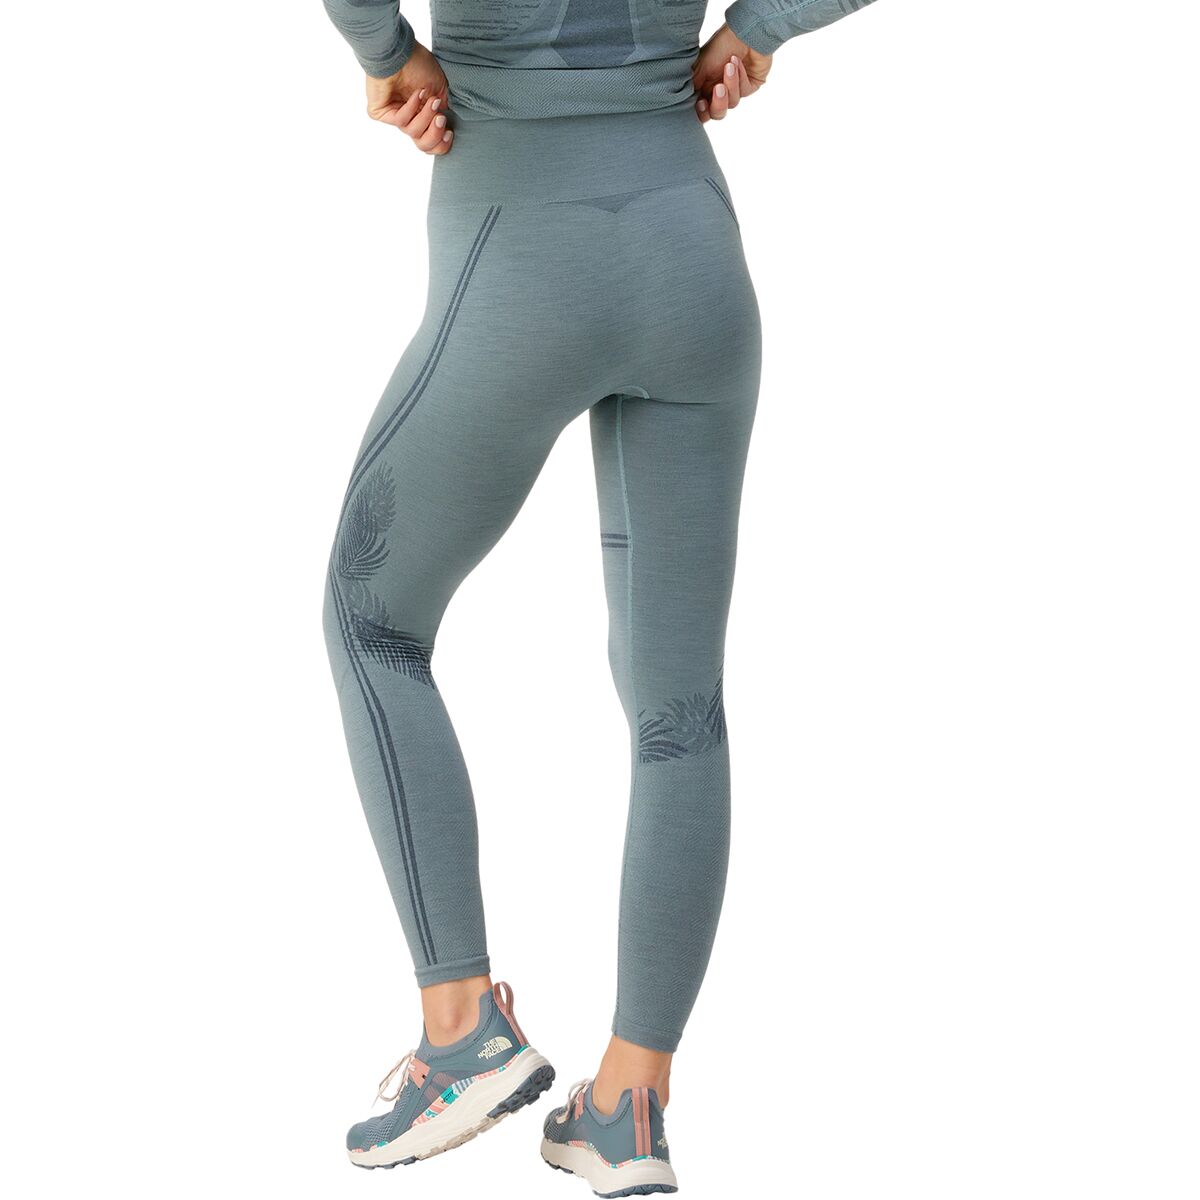 Smartwool Intraknit Active Base Layer Bottoms - Women's